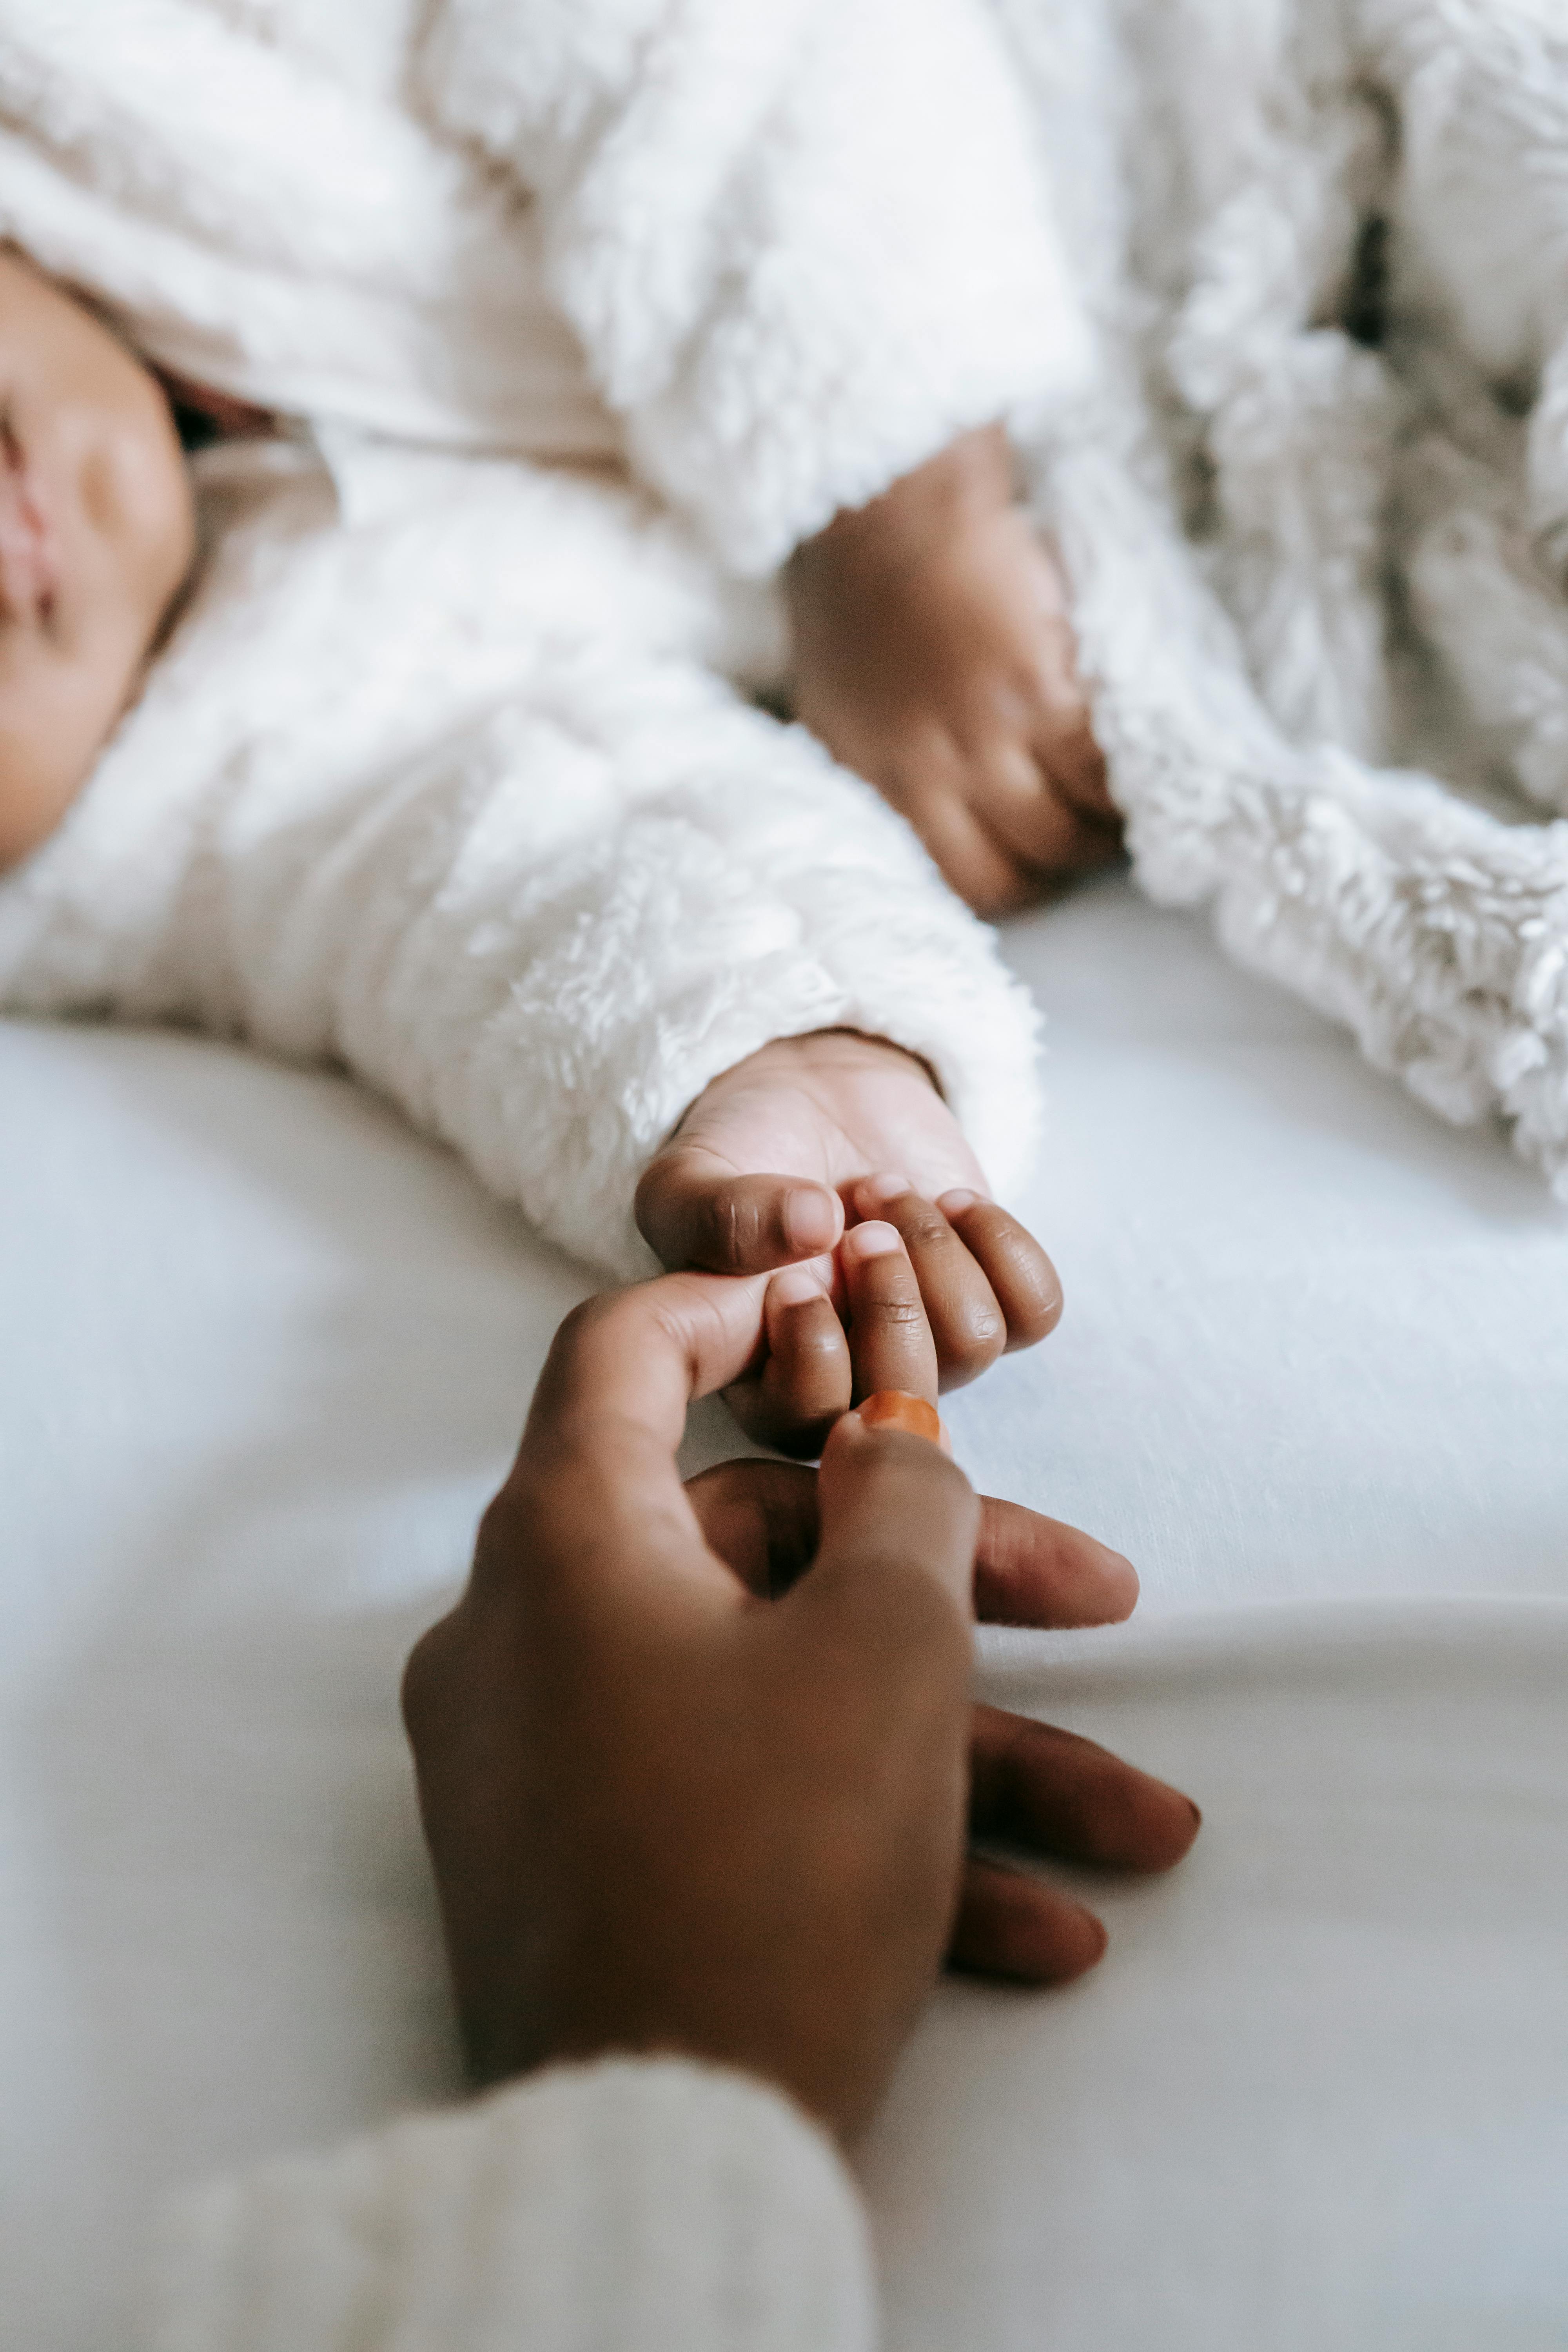 A woman's hand touching the hand of a baby | Source: Pexels